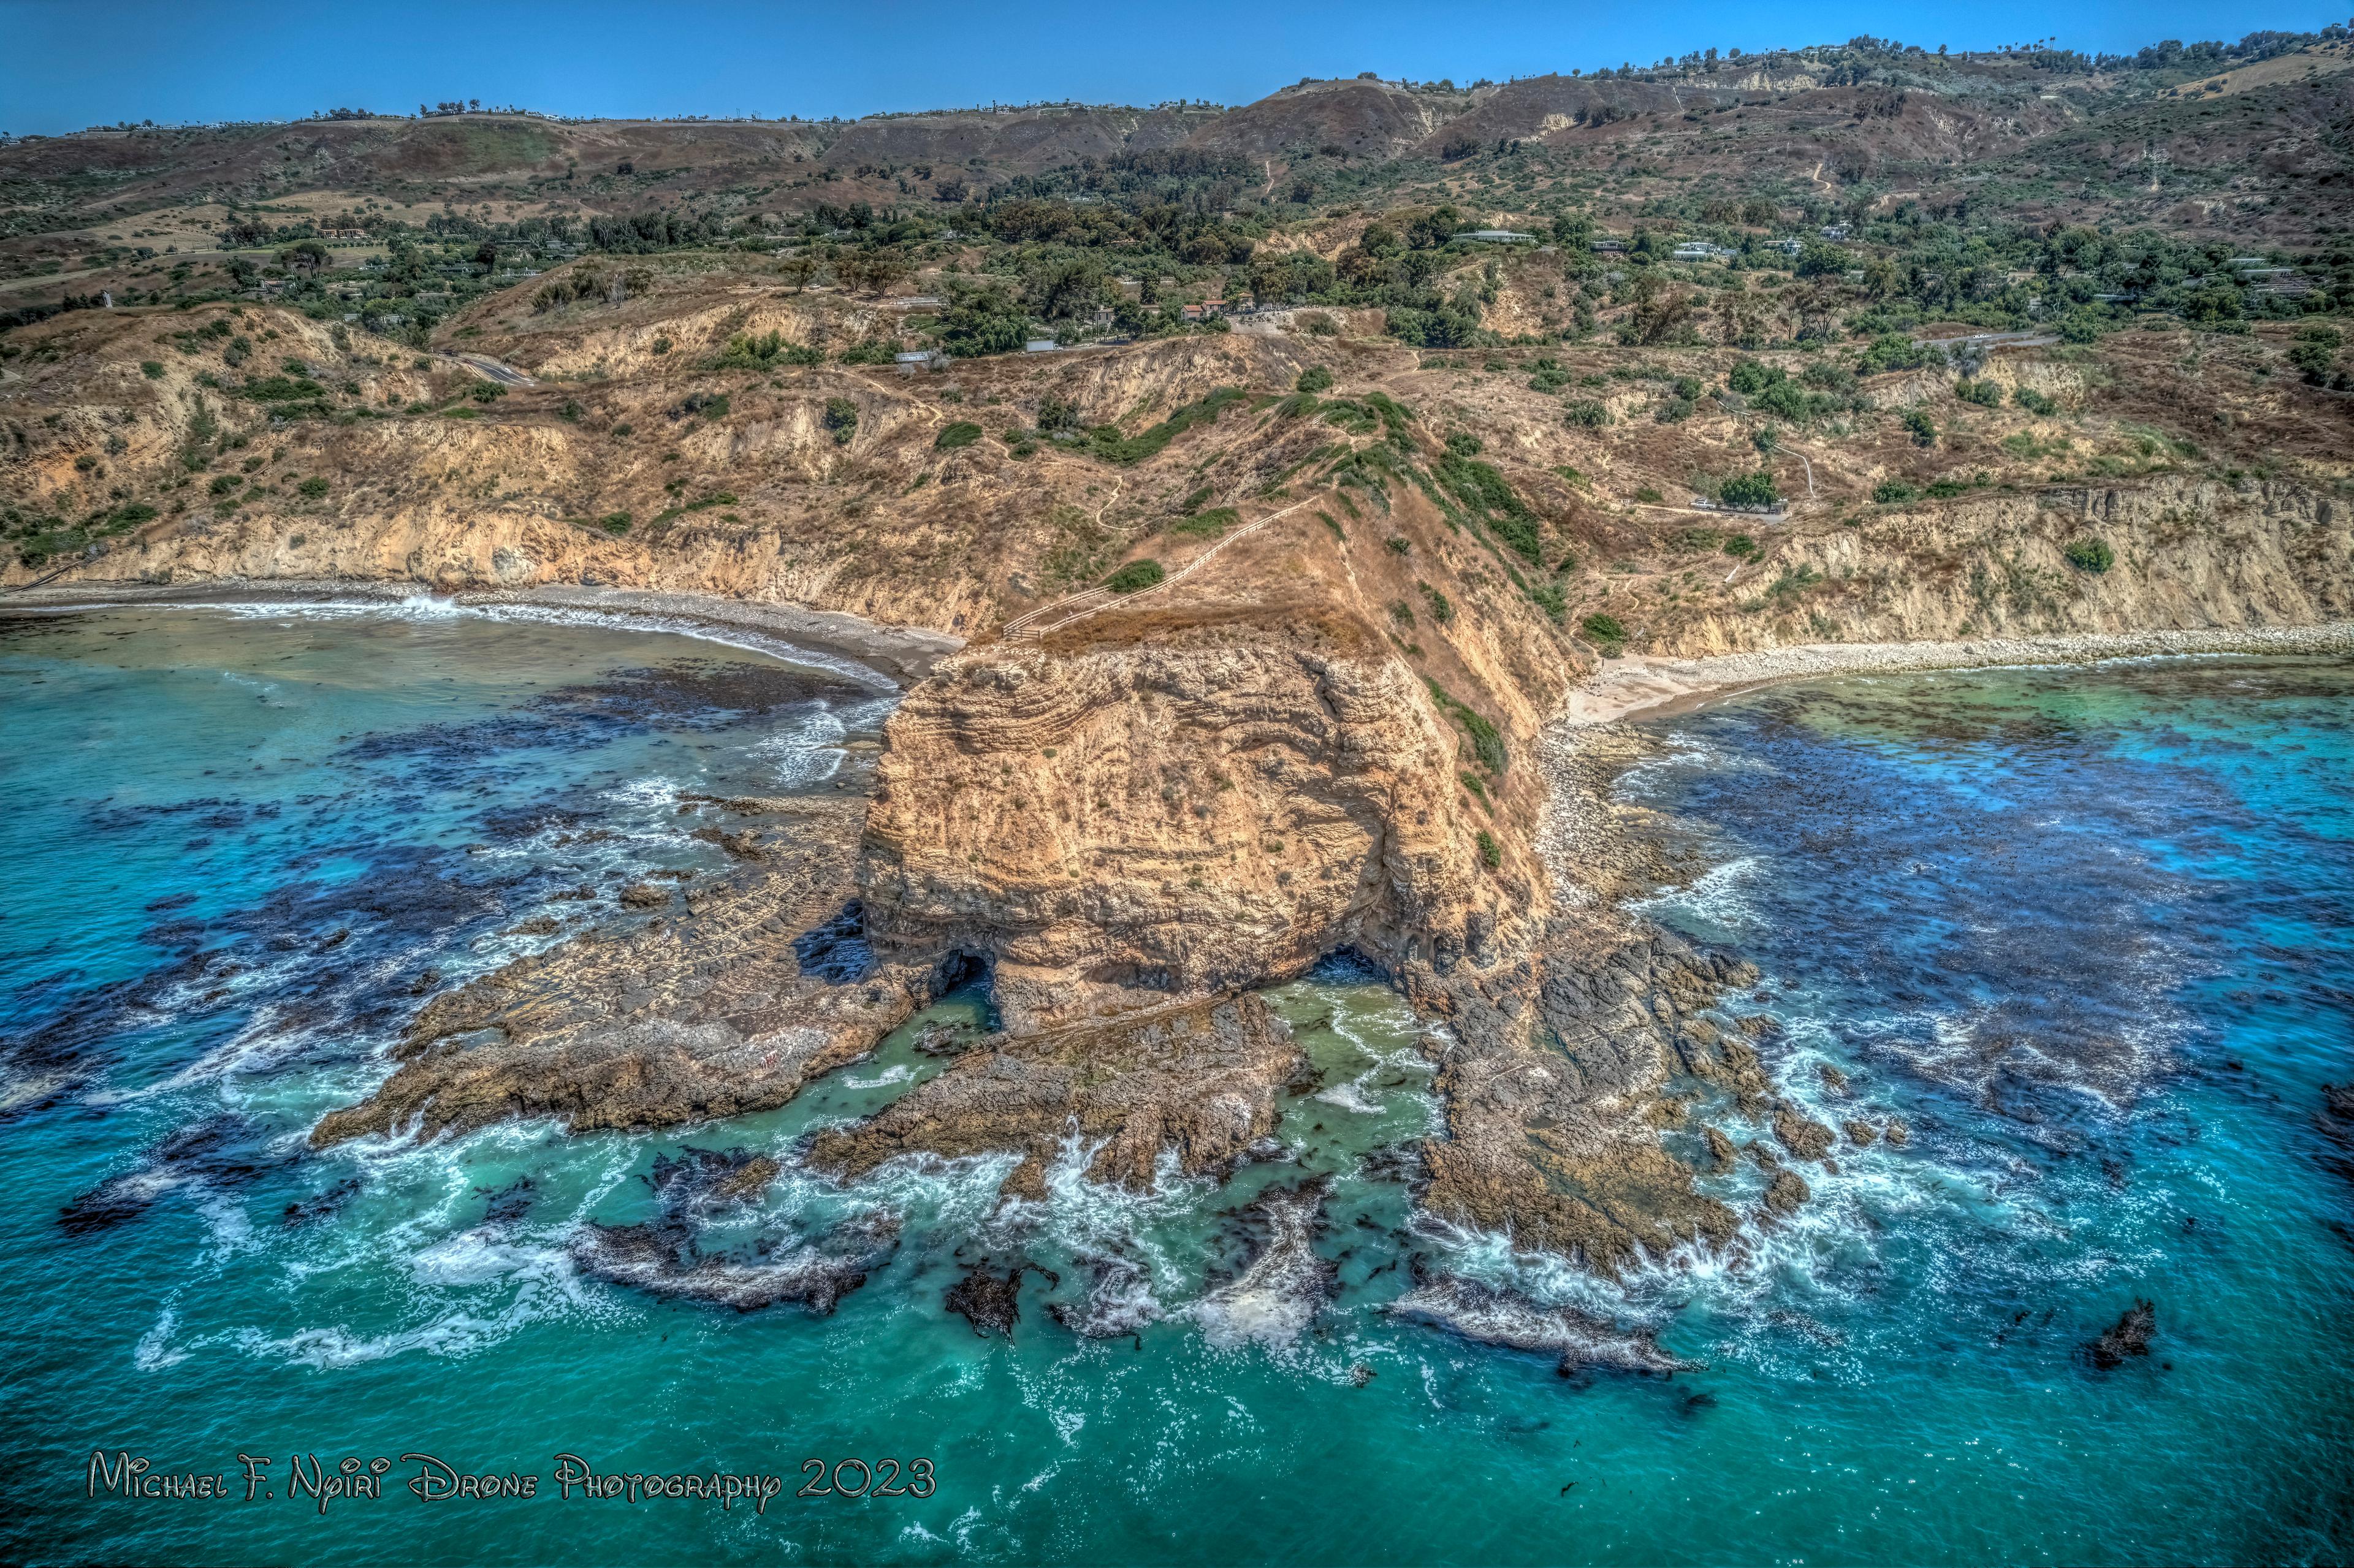 Sandee - Abalone Point